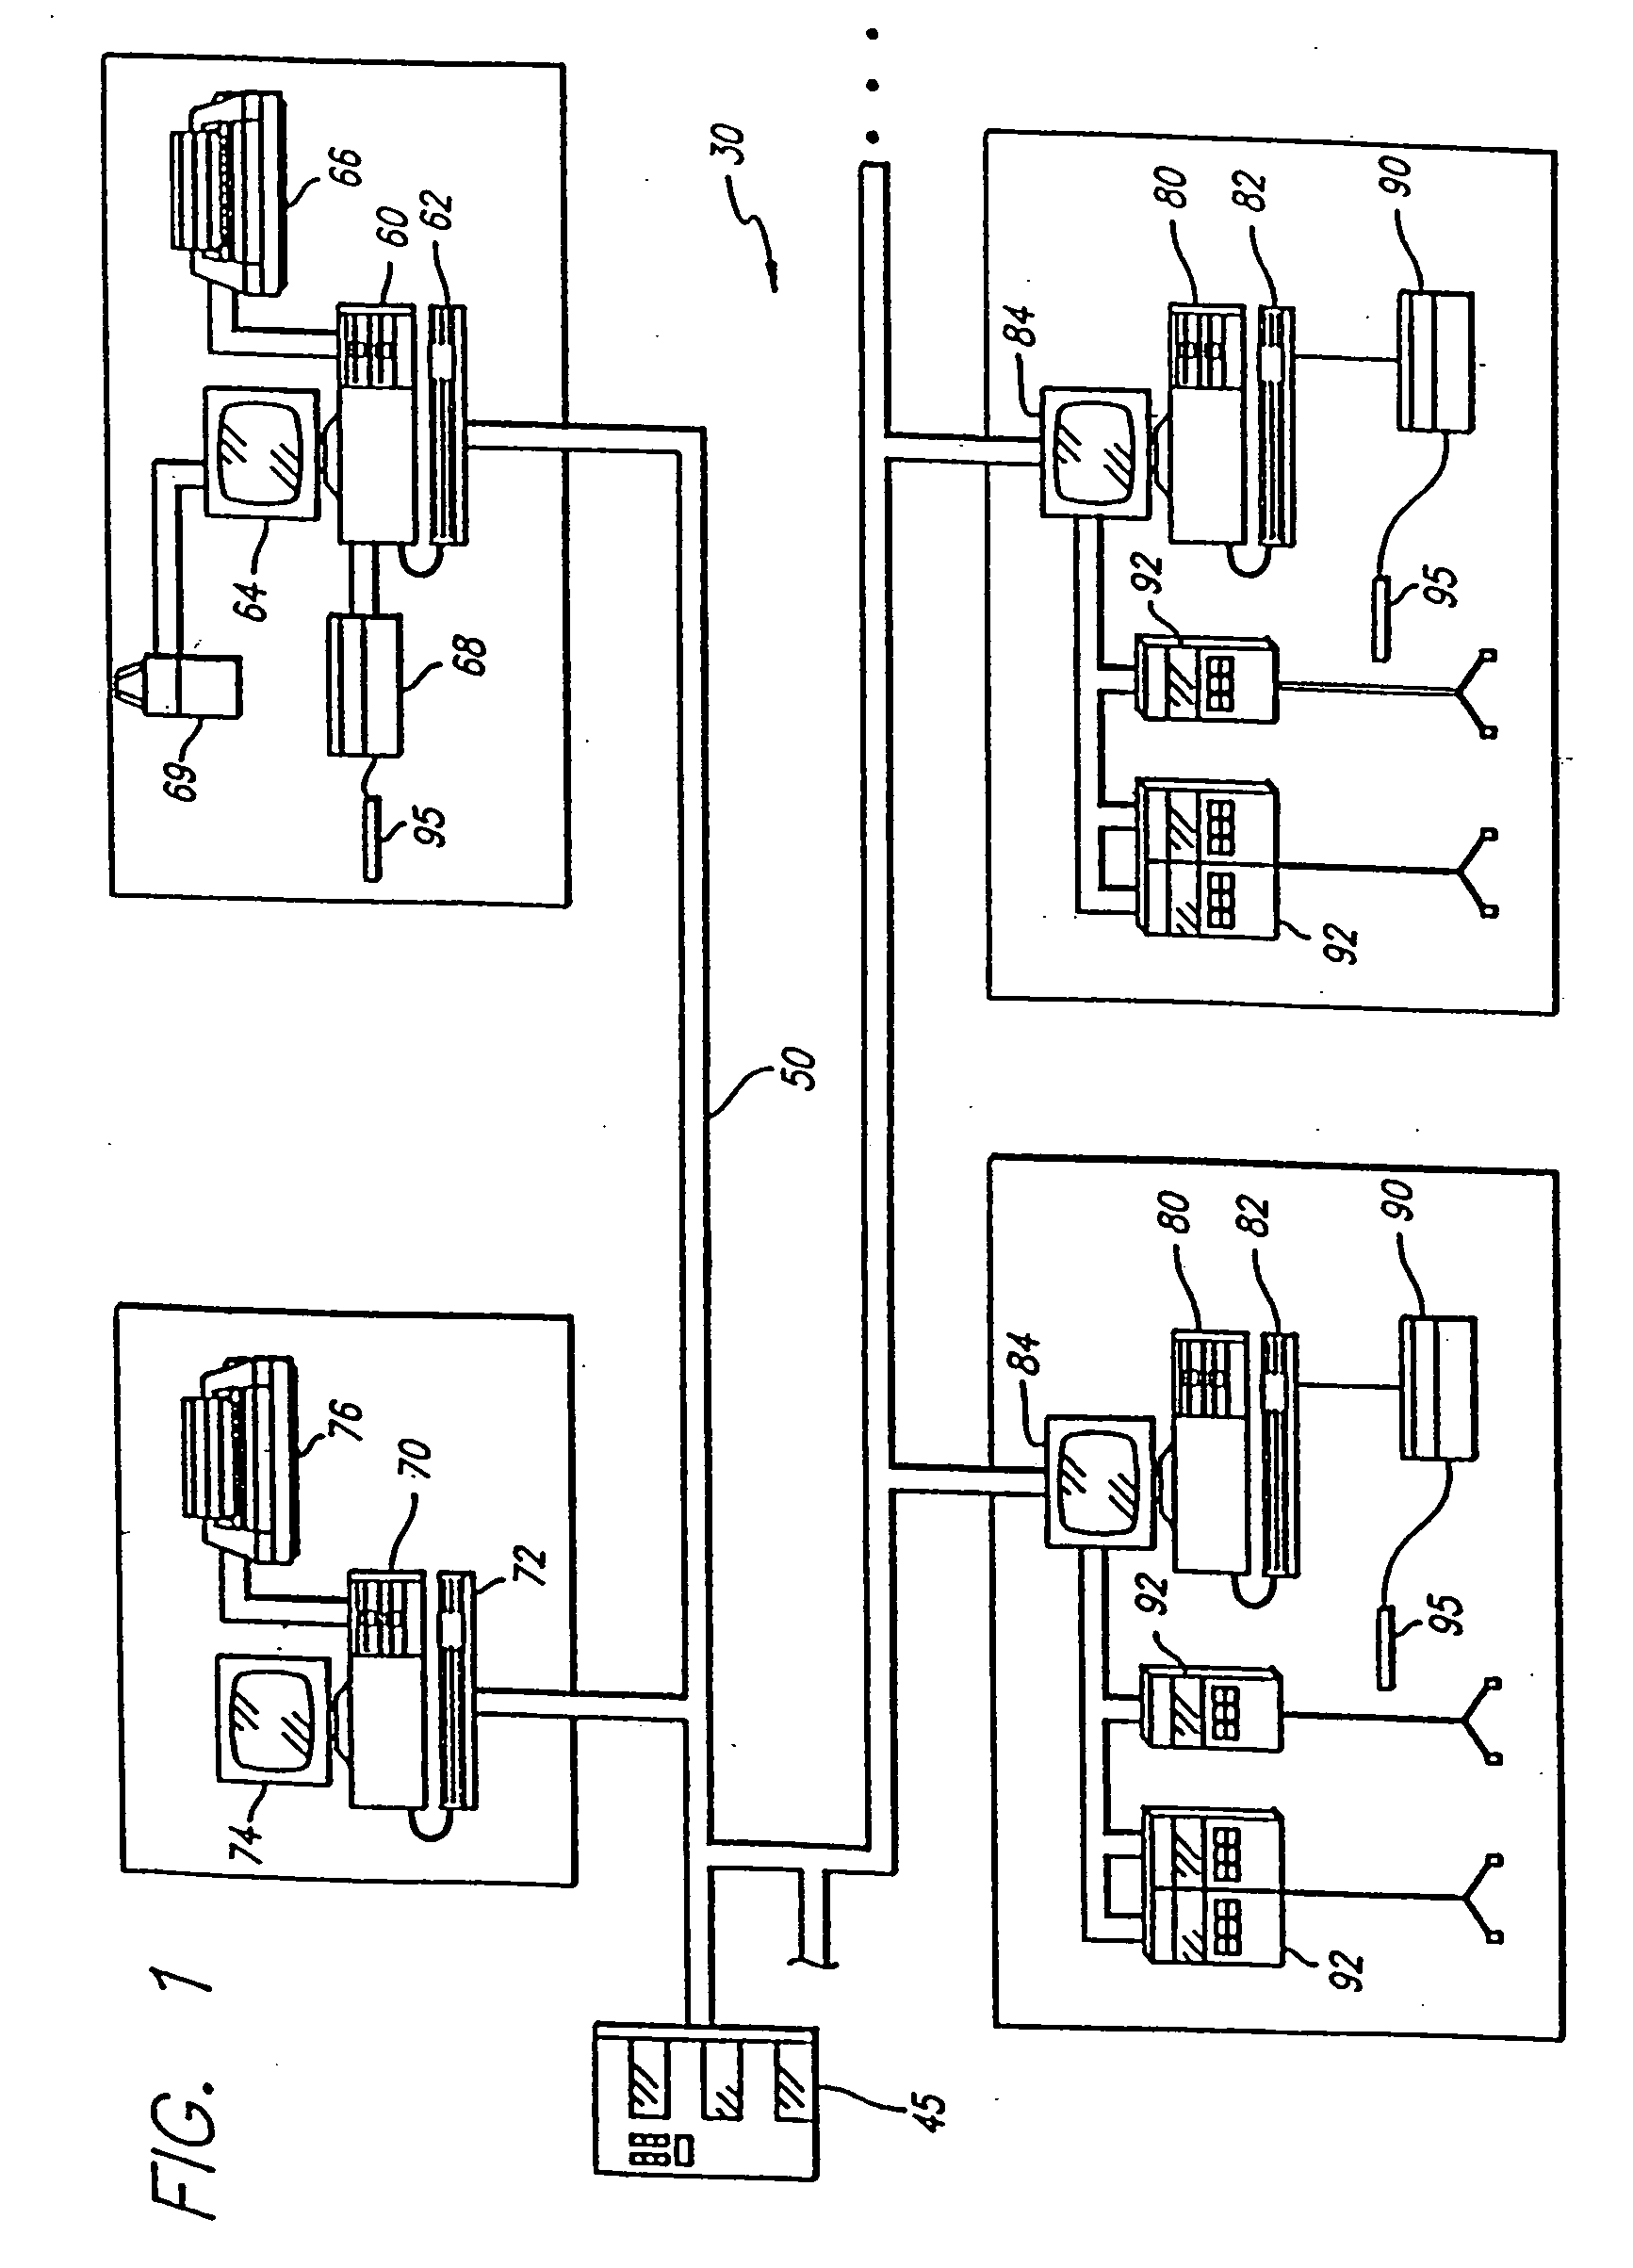 System and method for programming a clinical device